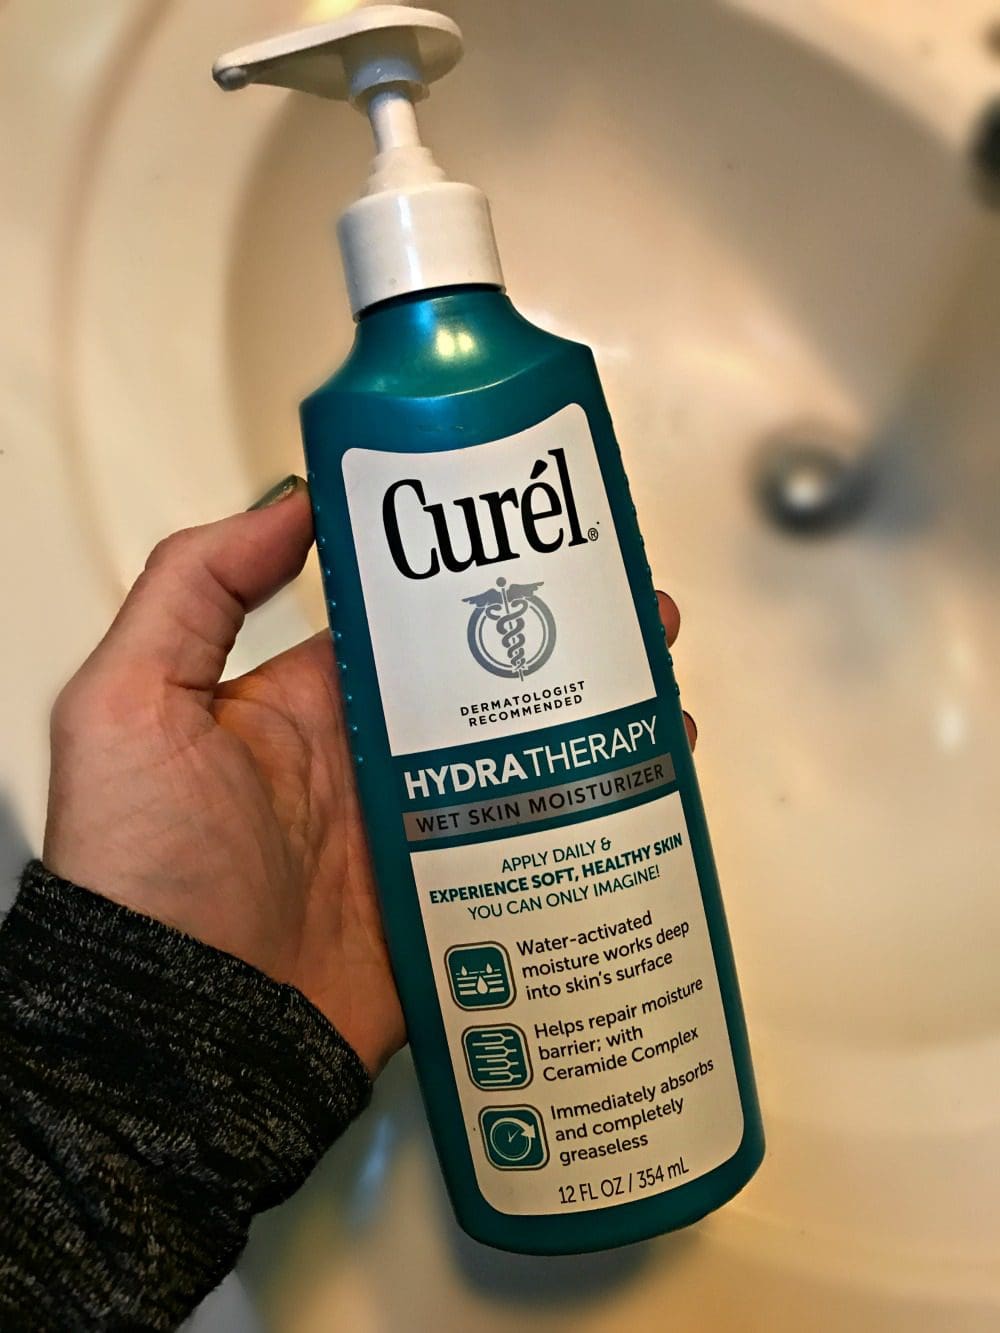 End Dry Skin with daily use of Curel Hydra Therapy Wet Skin Moisturizer